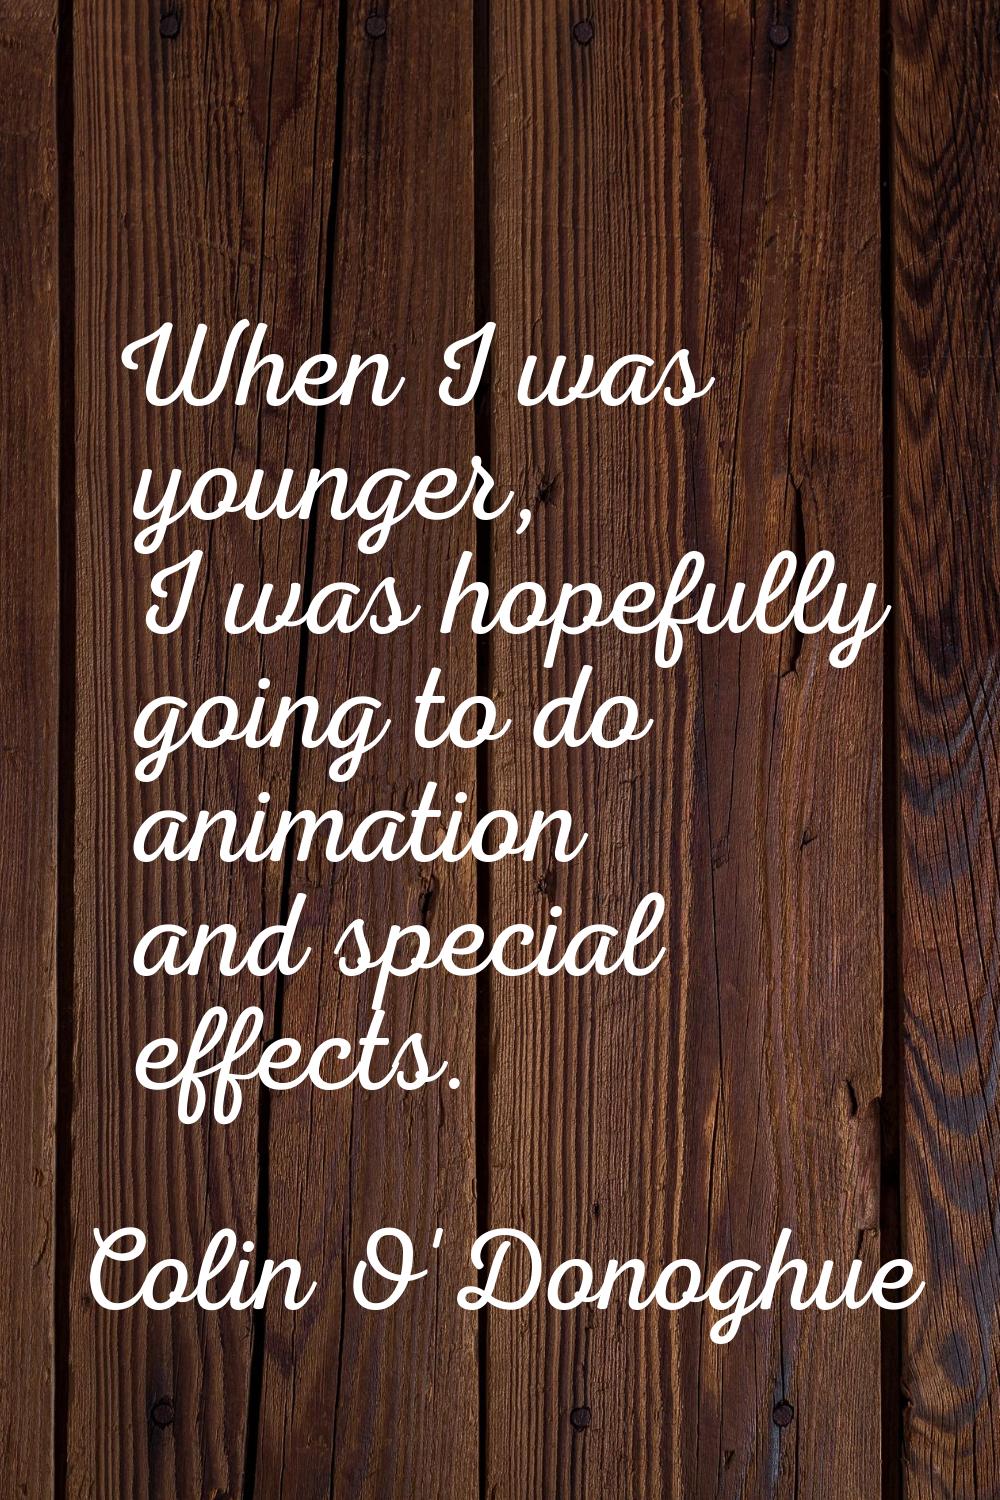 When I was younger, I was hopefully going to do animation and special effects.